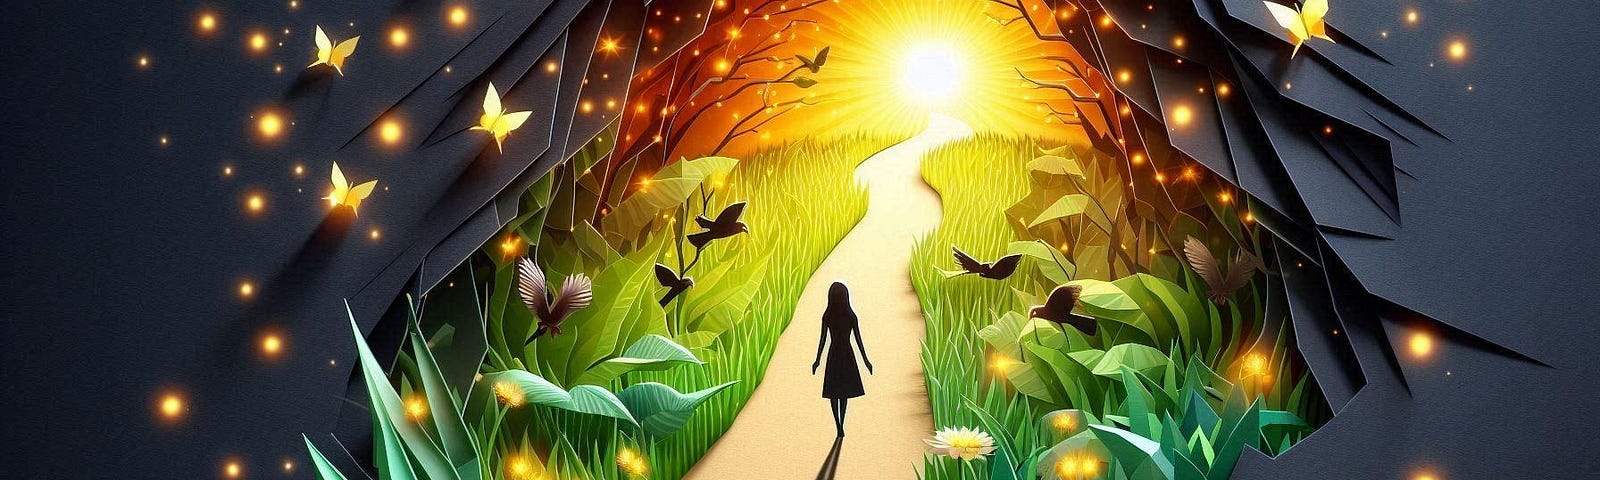 An image depicting a woman walking through a crack in the earth’s surface. As she continues along the path, she discovers a beautiful world of light and beauty beneath, revealing blessings in disguise.